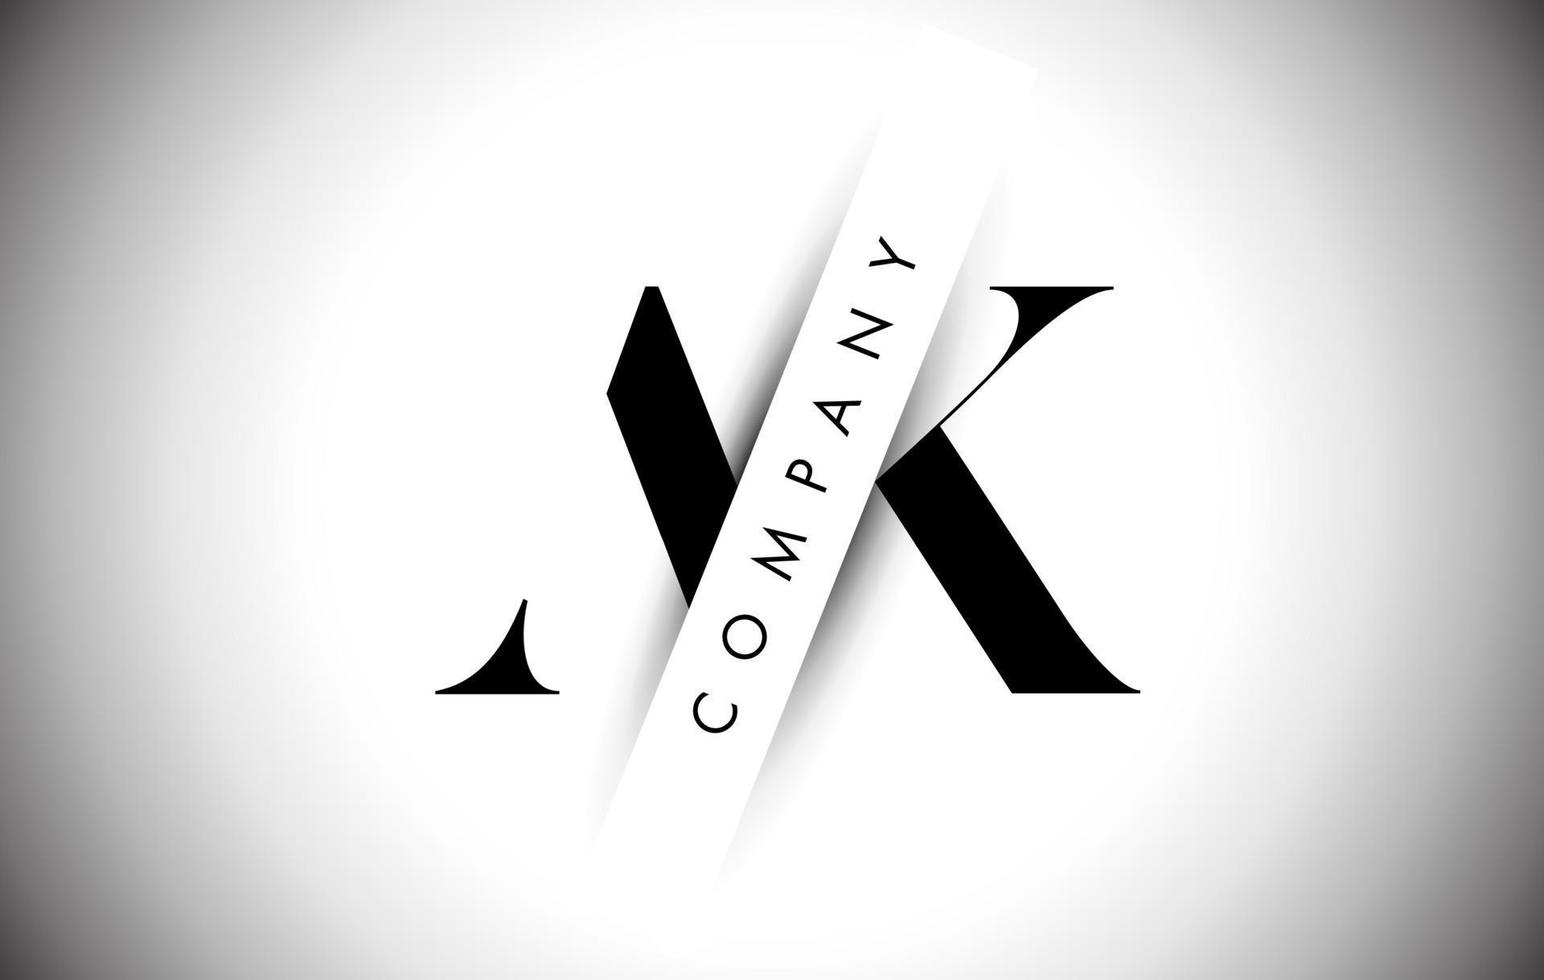 AK A K Letter Logo with Creative Shadow Cut and Overlayered Text Design. vector